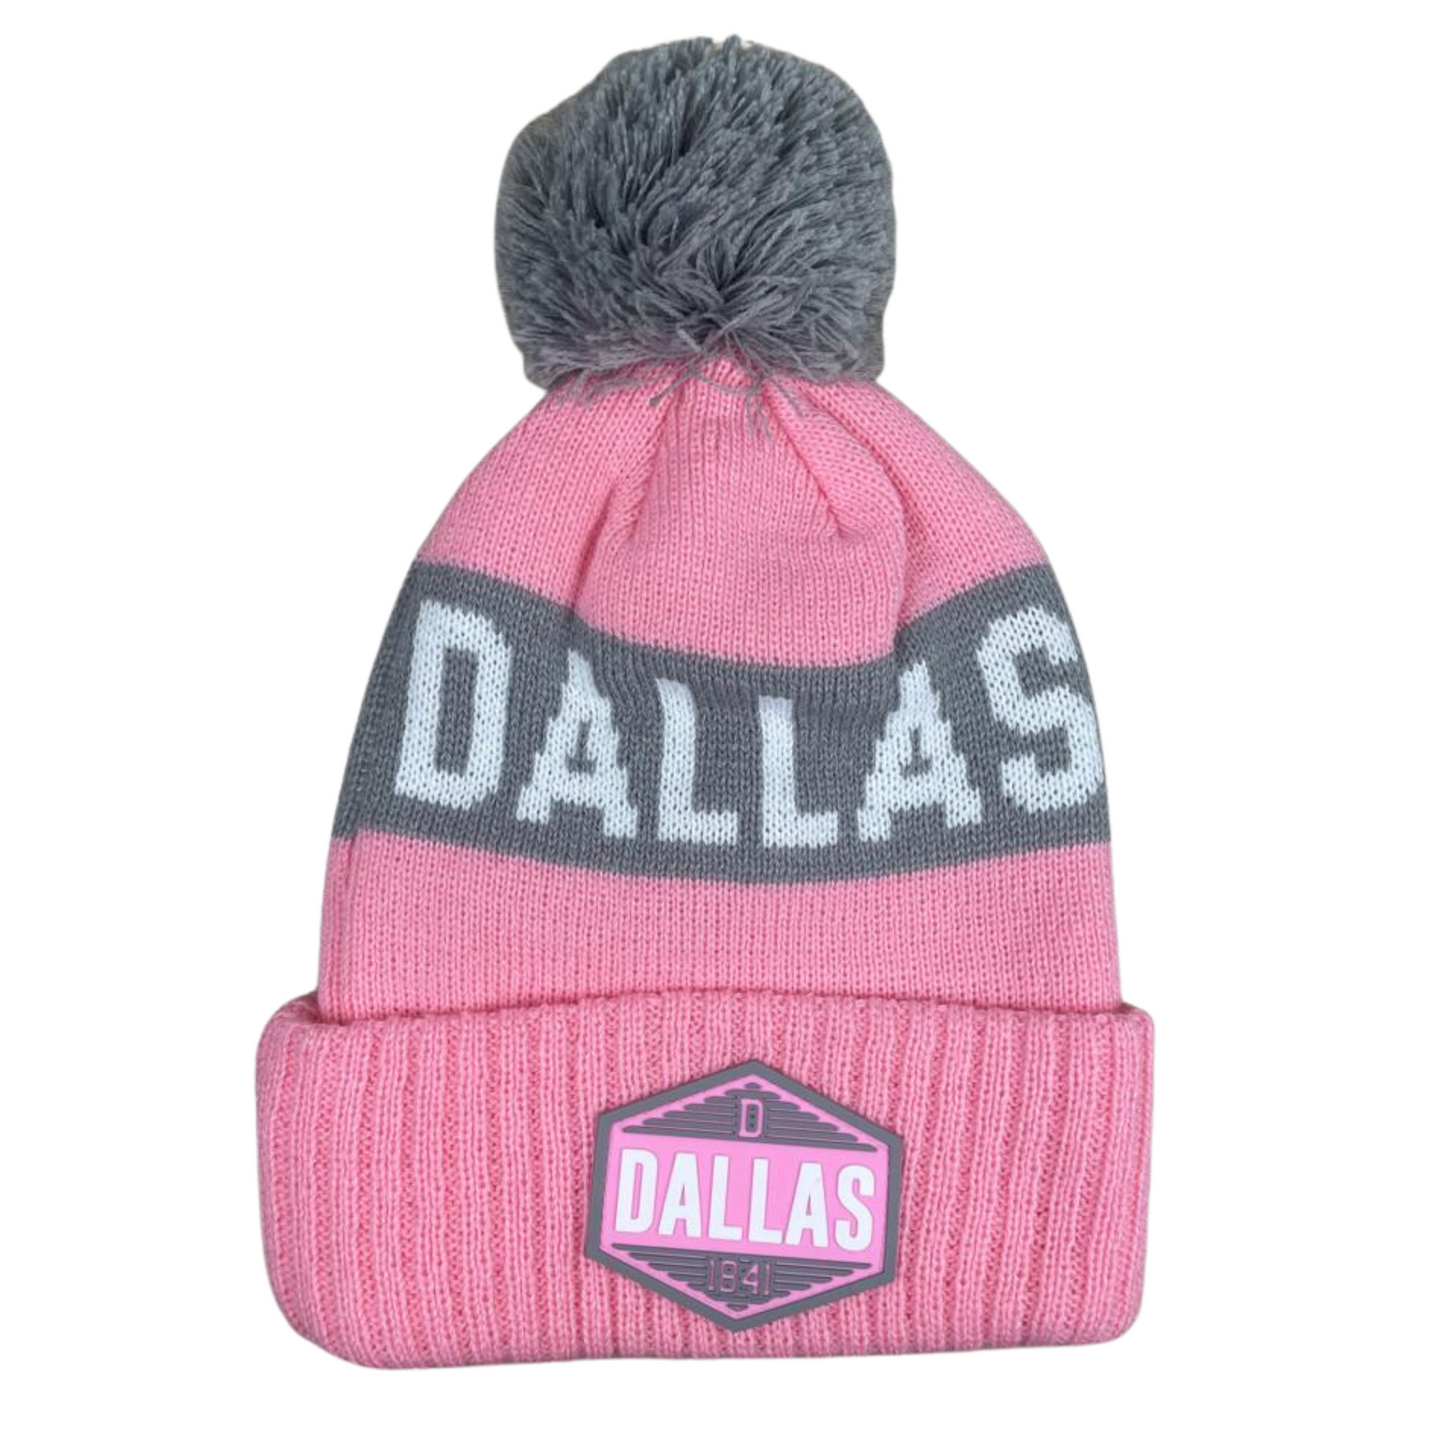 Dallas Winter Football Beanie - Stay Warm & Cheer for Your Team in Style!